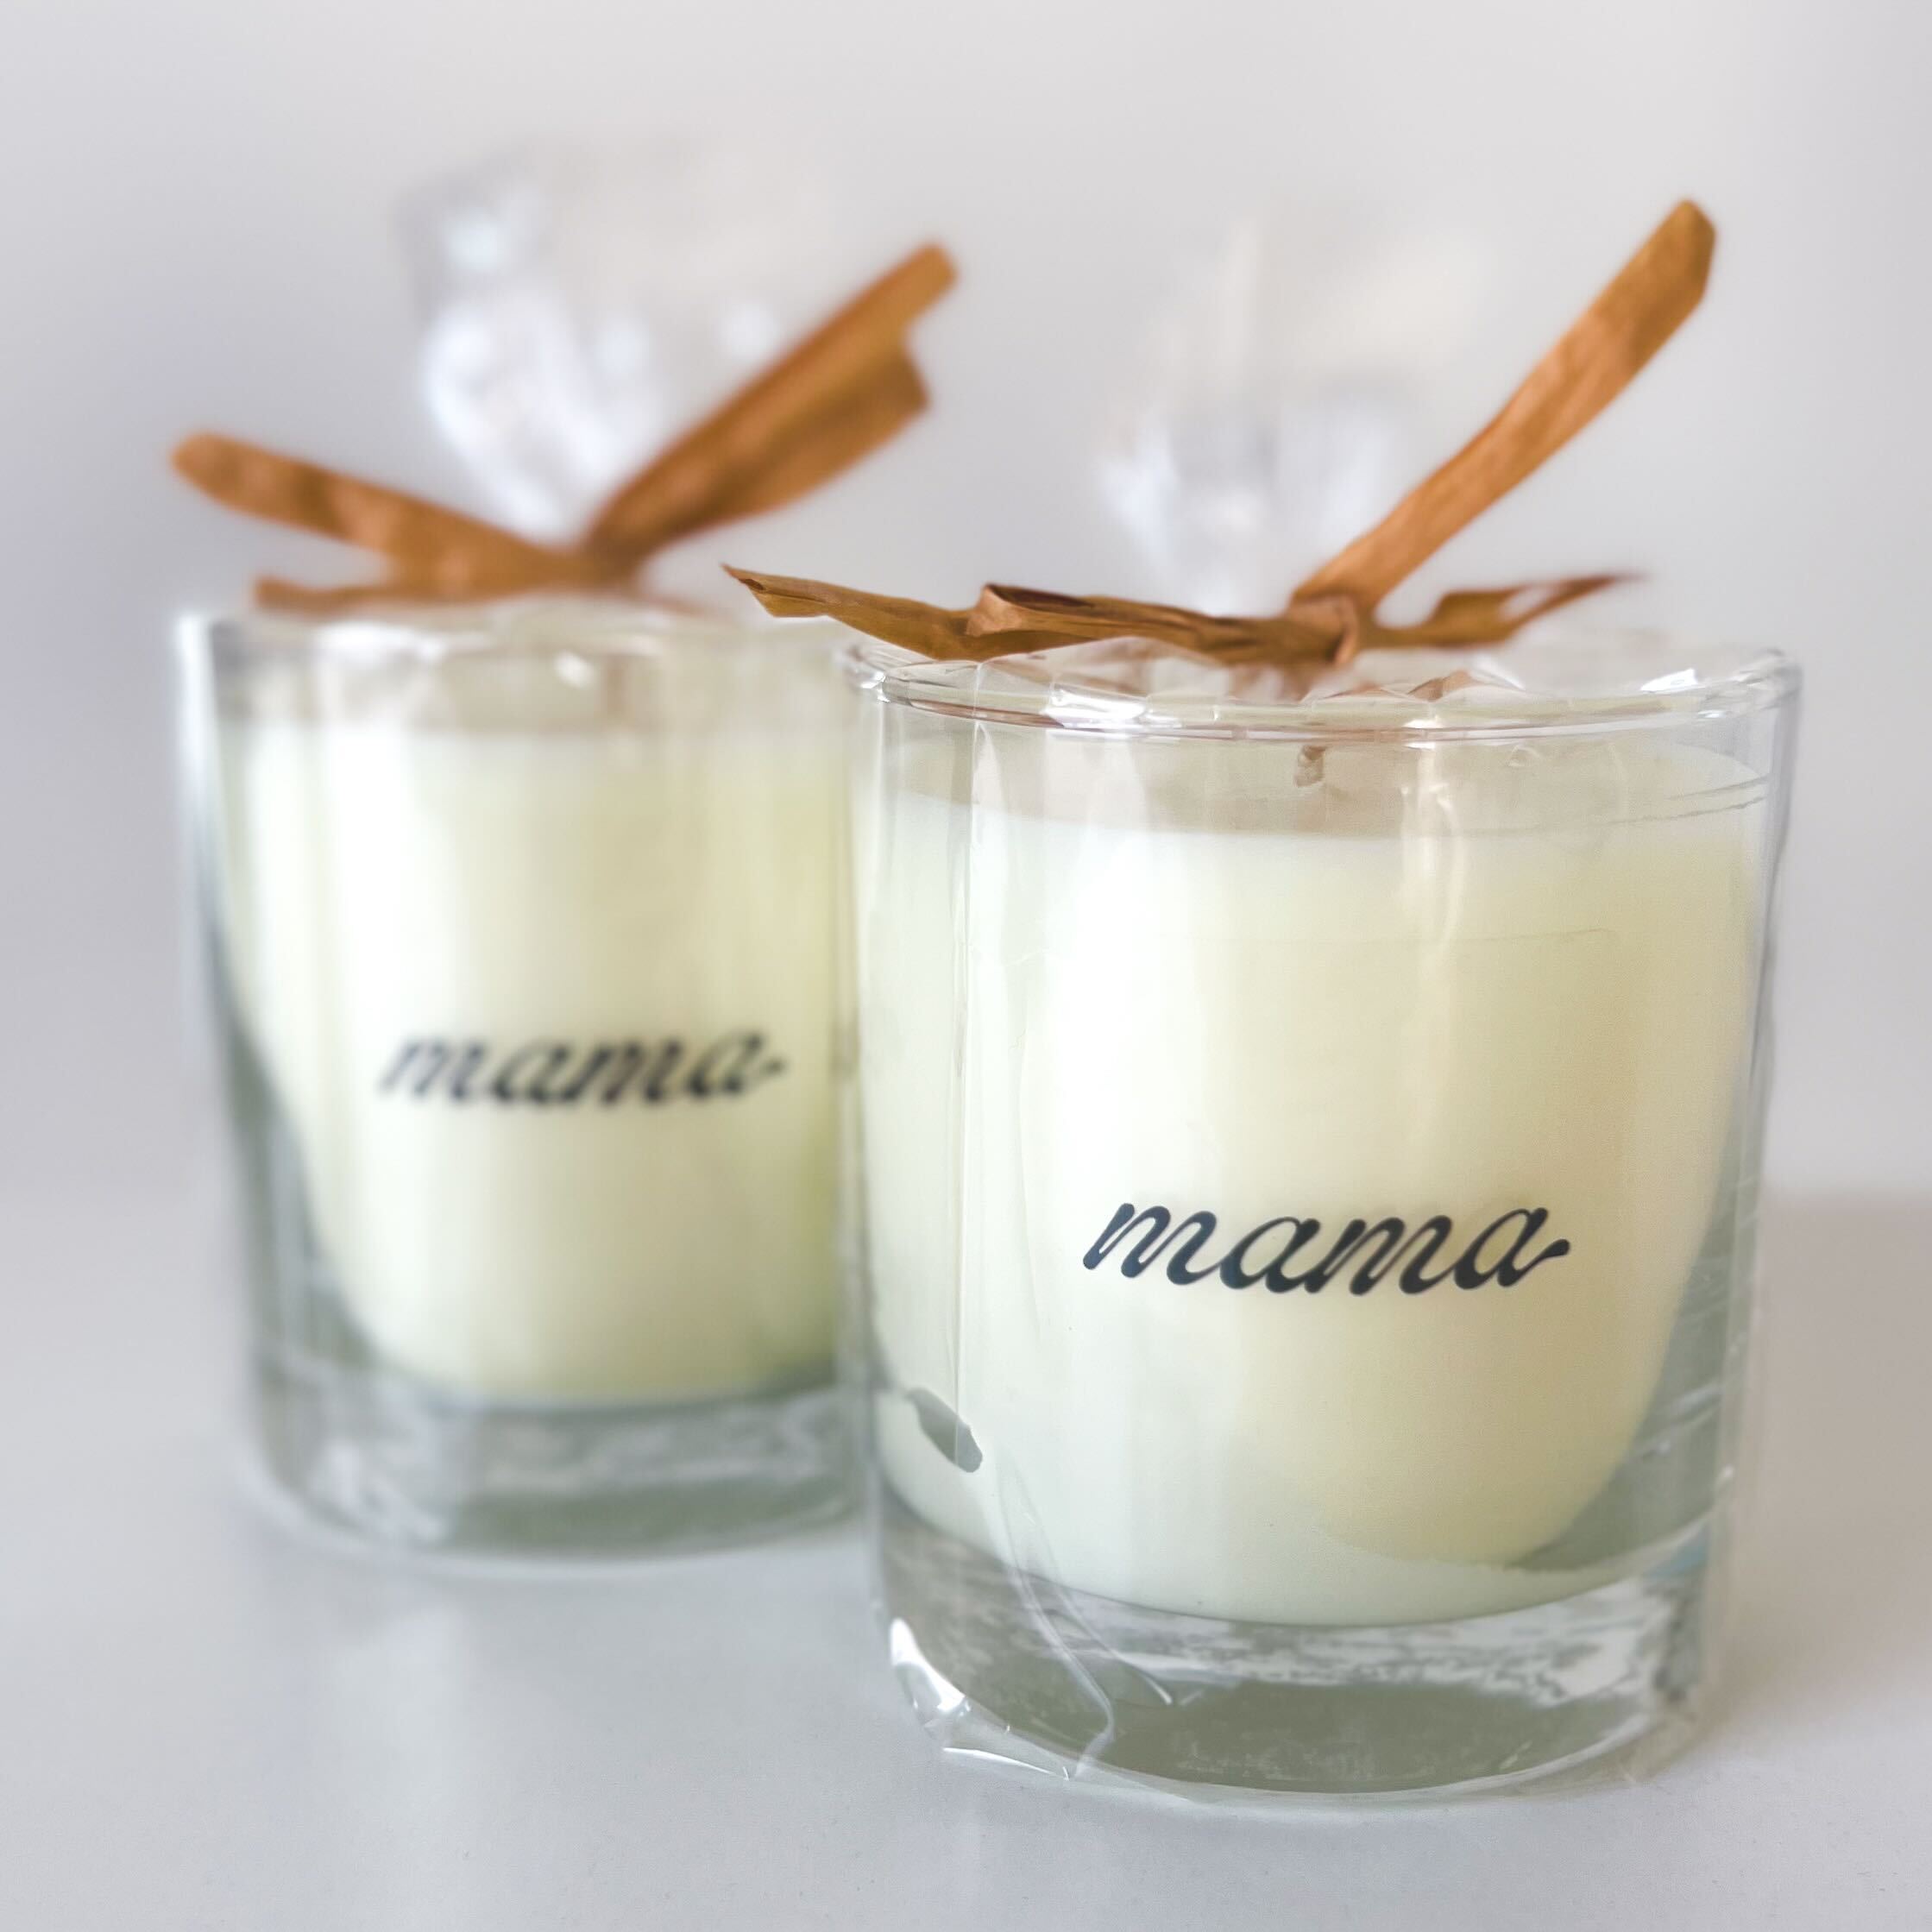 2 candles with 'mama' written on them